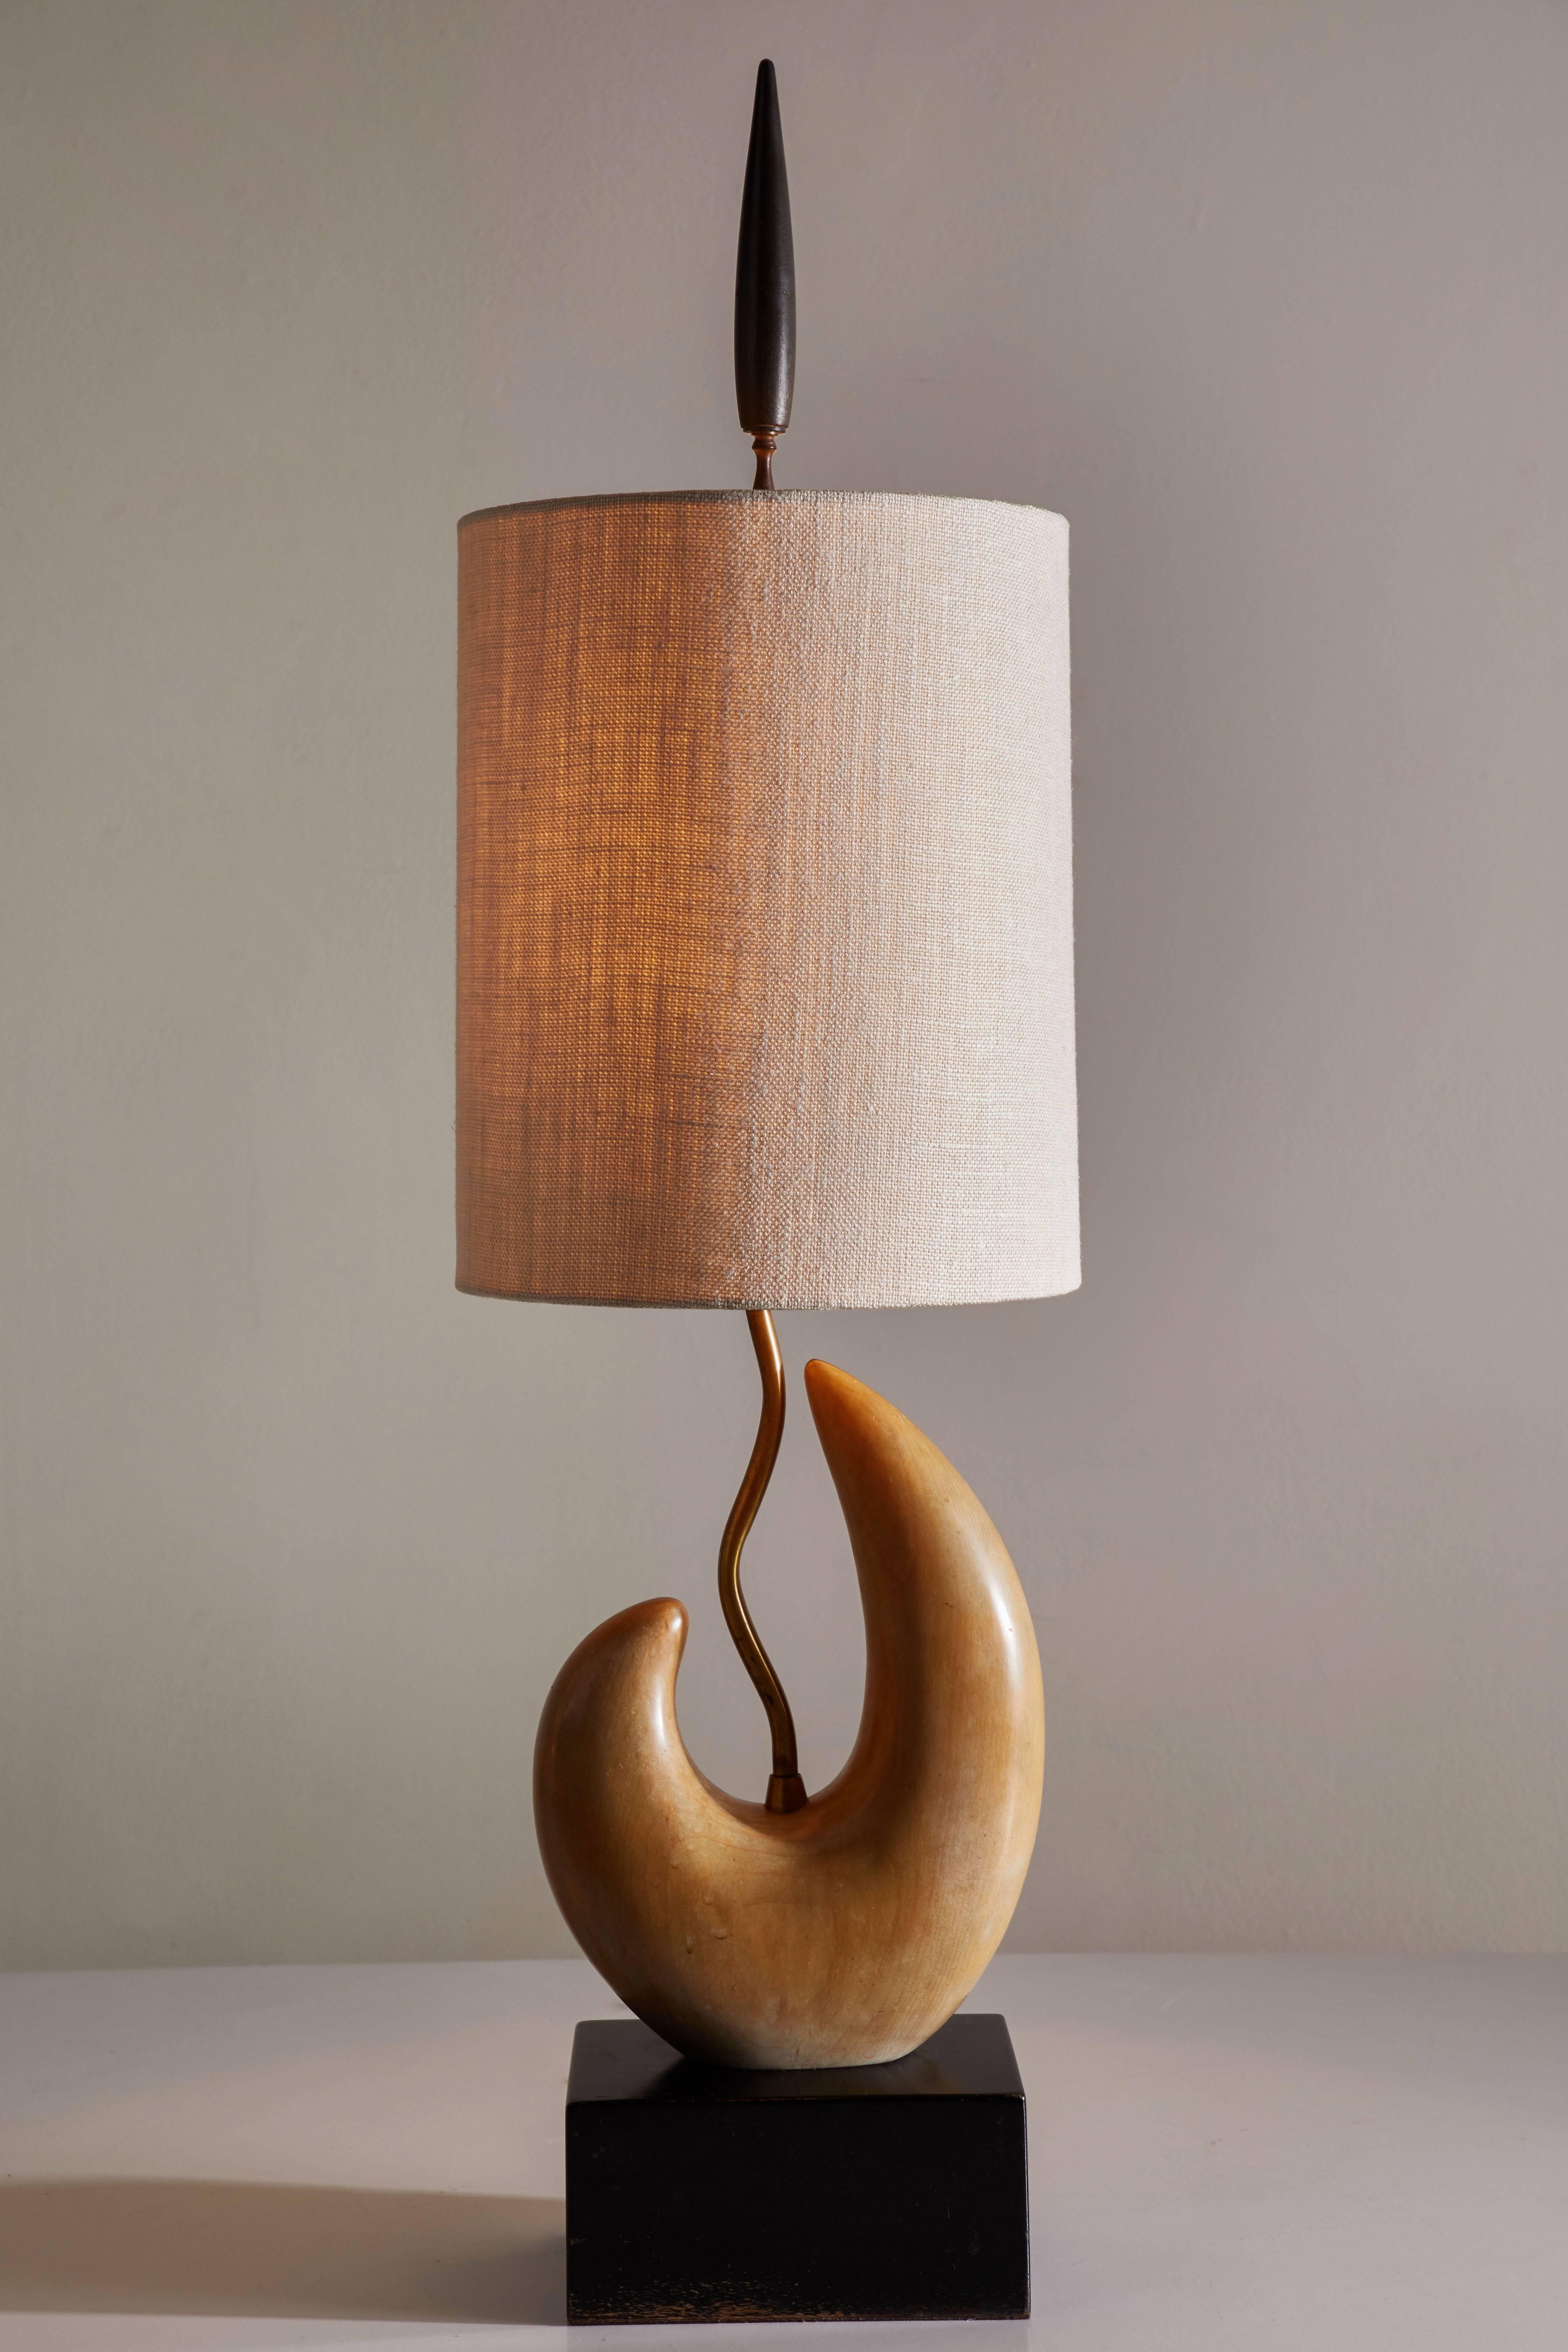 Rare table lamp by Yasha Heifetz designed in the US, circa 1950s. Original solid enameled wood base and lacquered sculptural wood form. Shade included with this fixture. Takes one E26 75w maximum bulb.